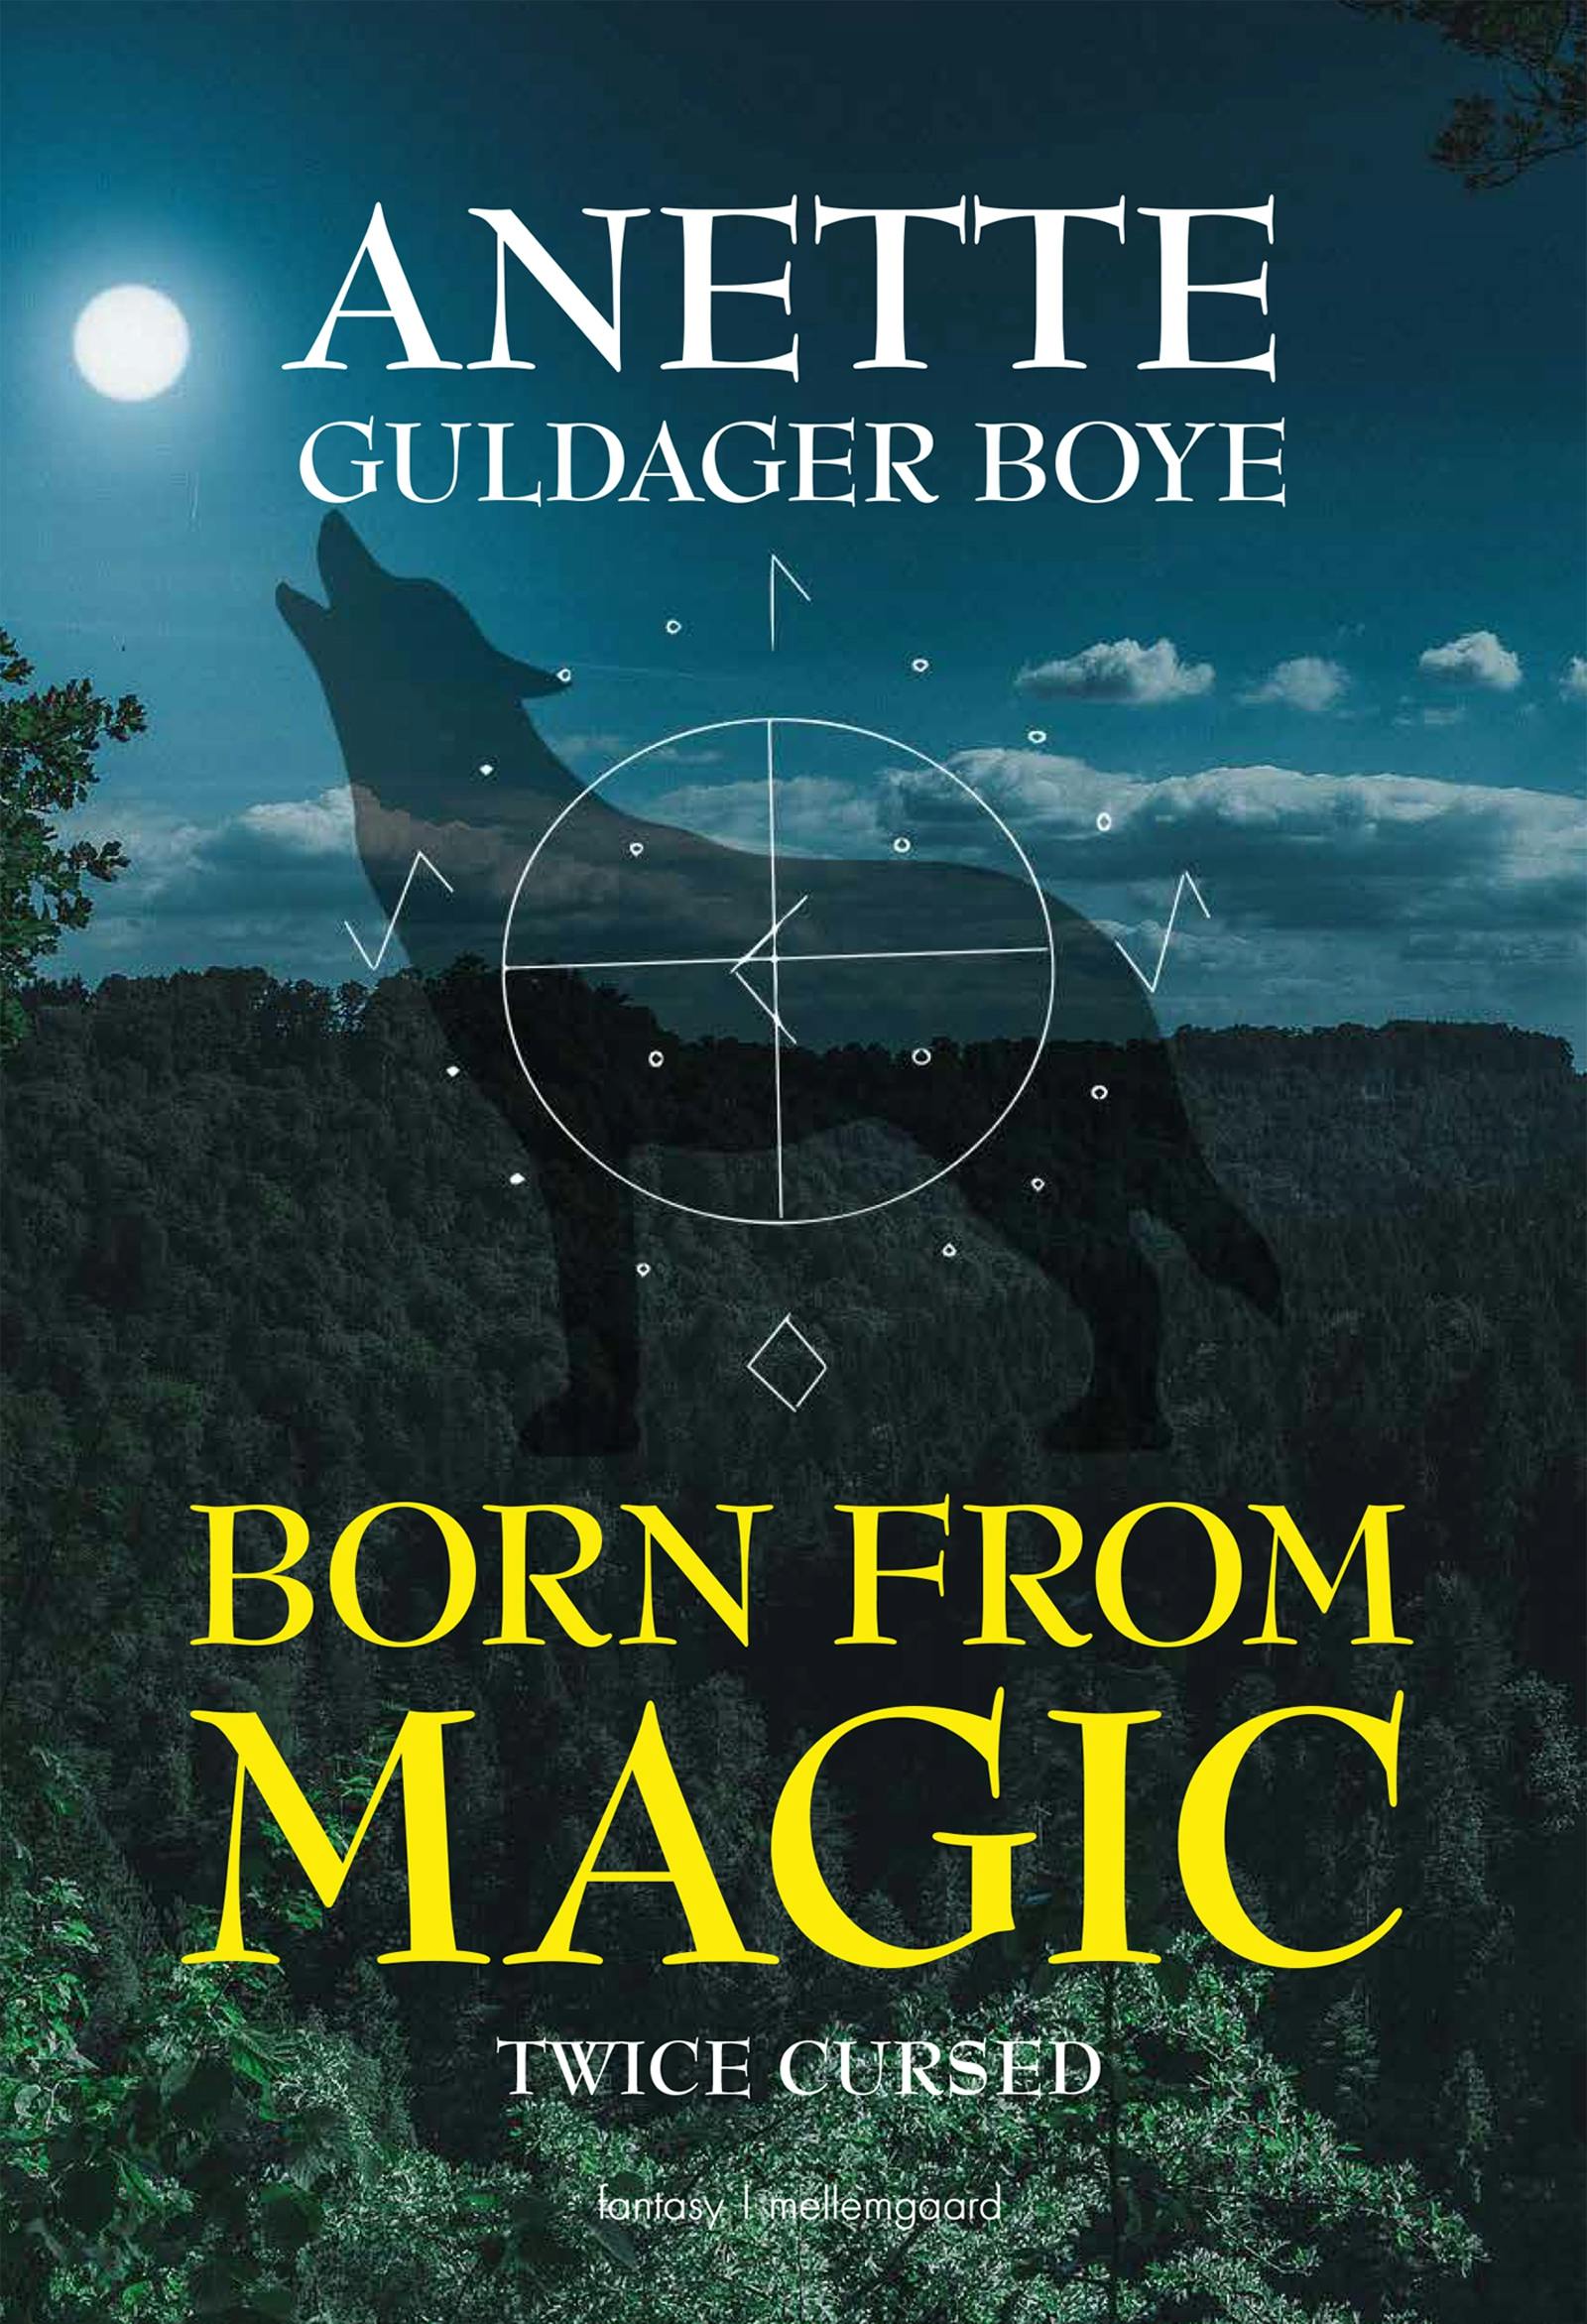 Born from magic – Twice cursed - Anette Guldager Boye